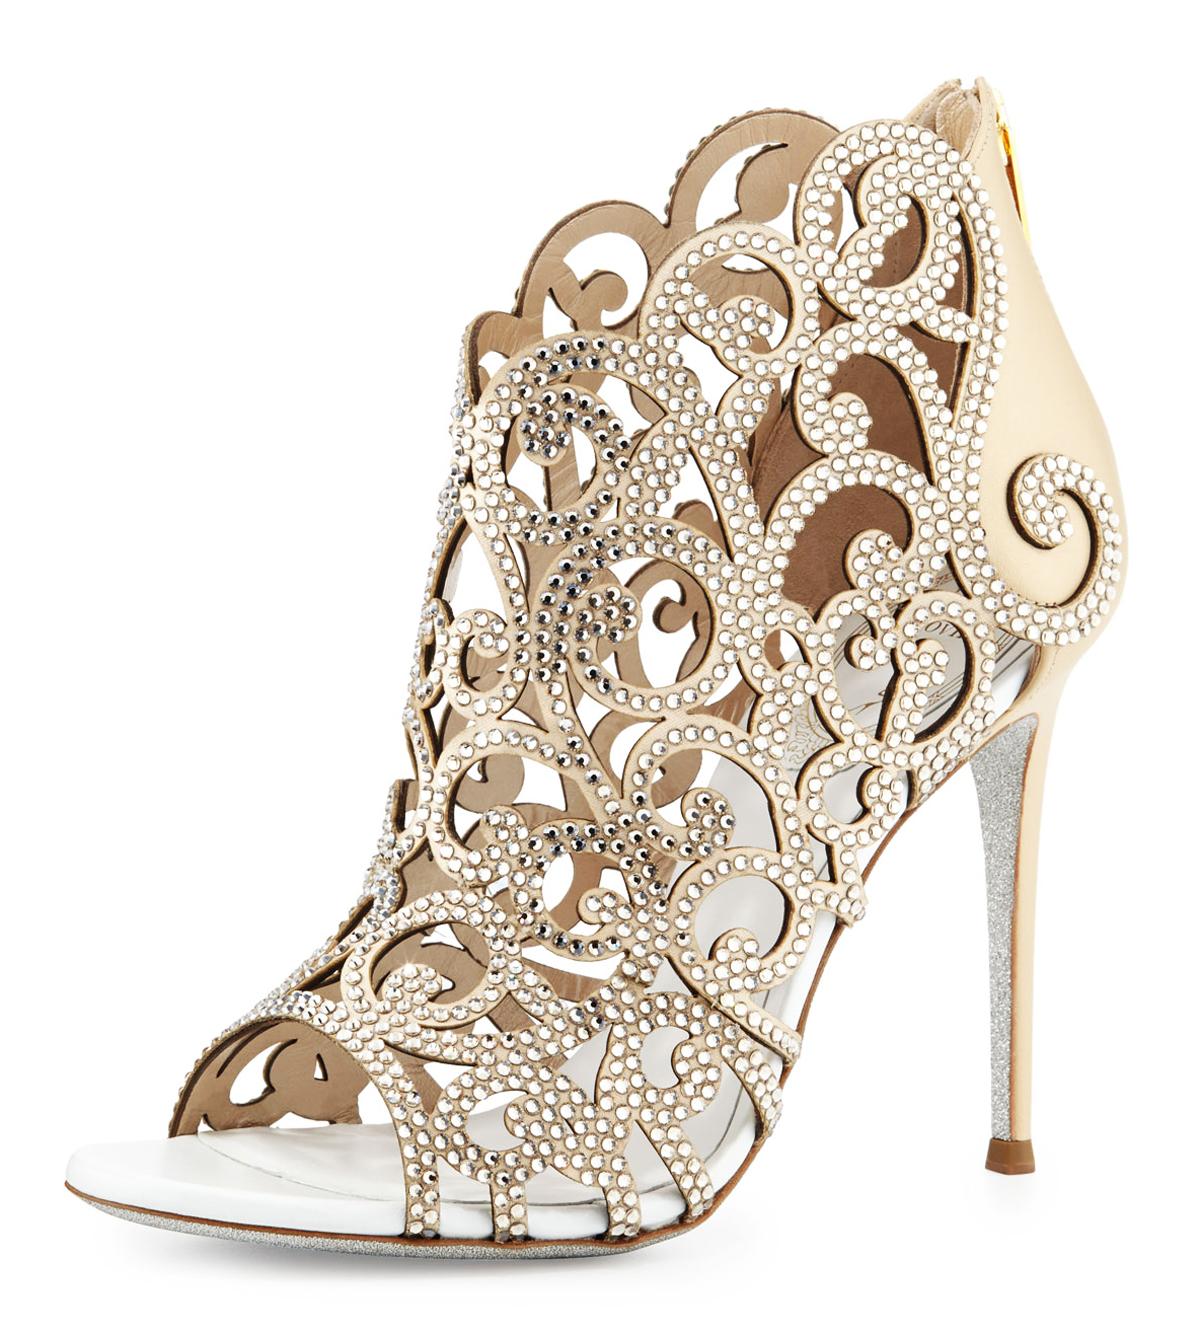 New Rene Caovilla Swarovski Crystal-Embellished Leather Ankle Sandals.
Designer size 37.5
Scroll Laser-Cut Vamp, Open Toe. Back Zip Eases Dress. White Leather Lining.
Signature Glittered Sole. Covered Heel - 4 inches.
Made in Italy. 
Retail